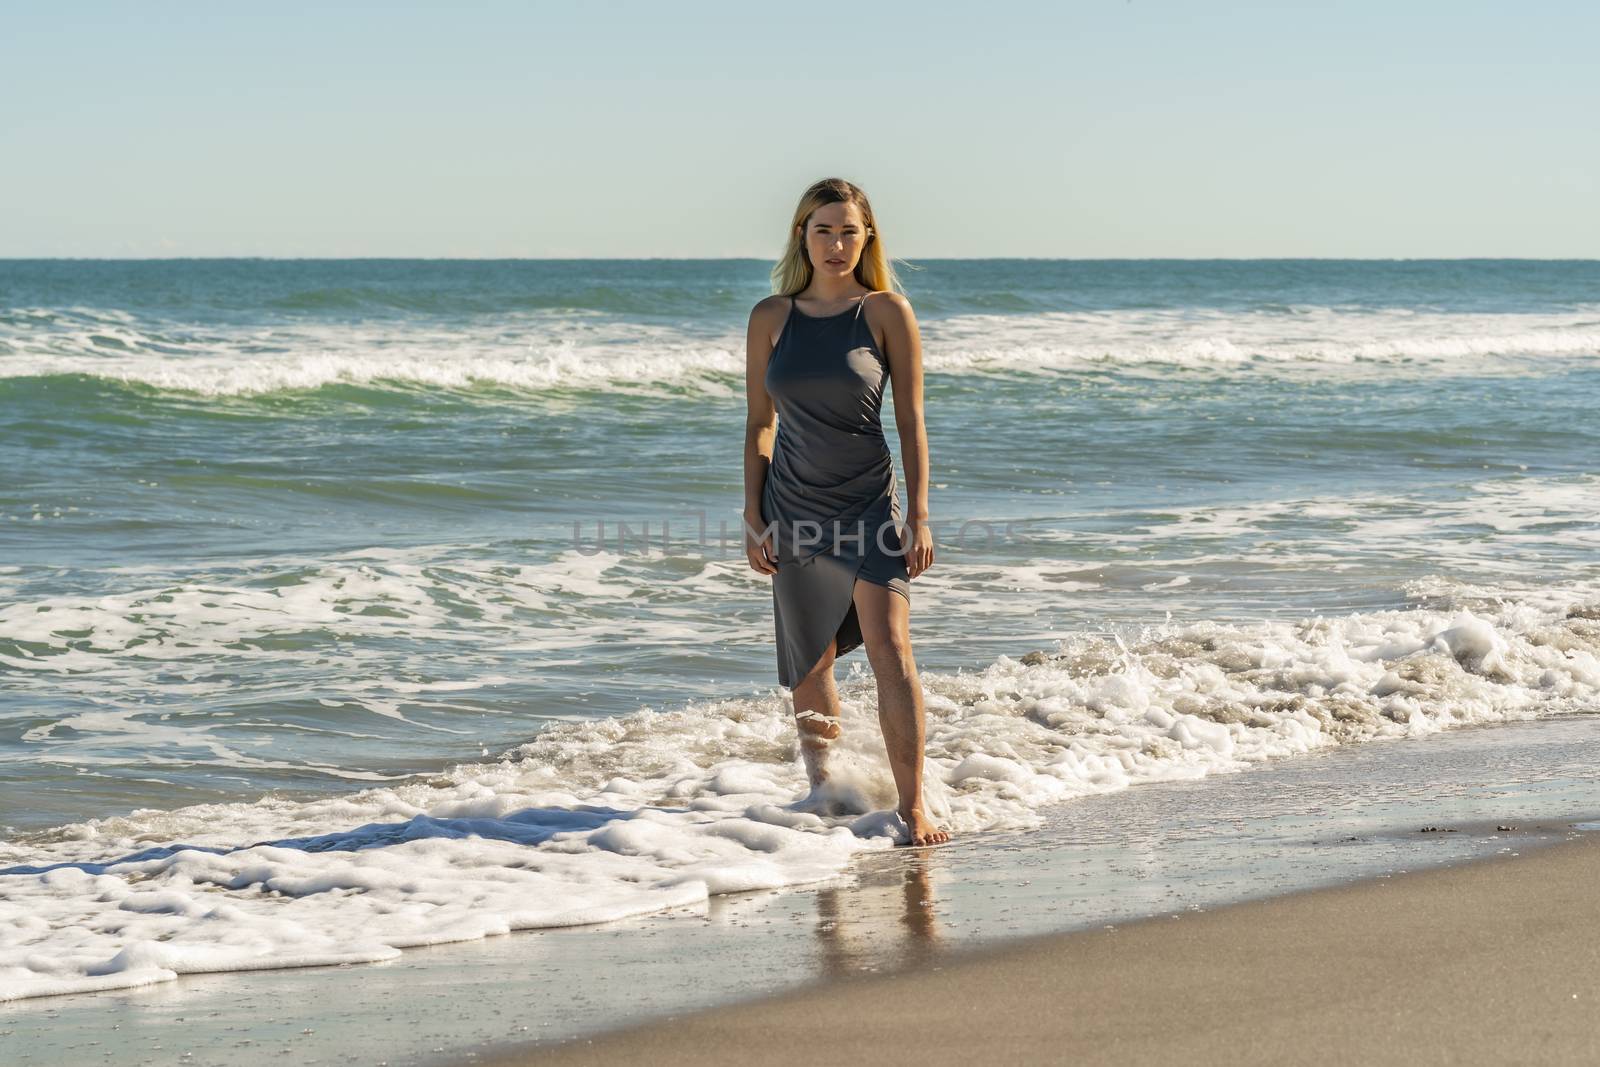 A gorgeous young blonde female enjoys a day at the beach alone